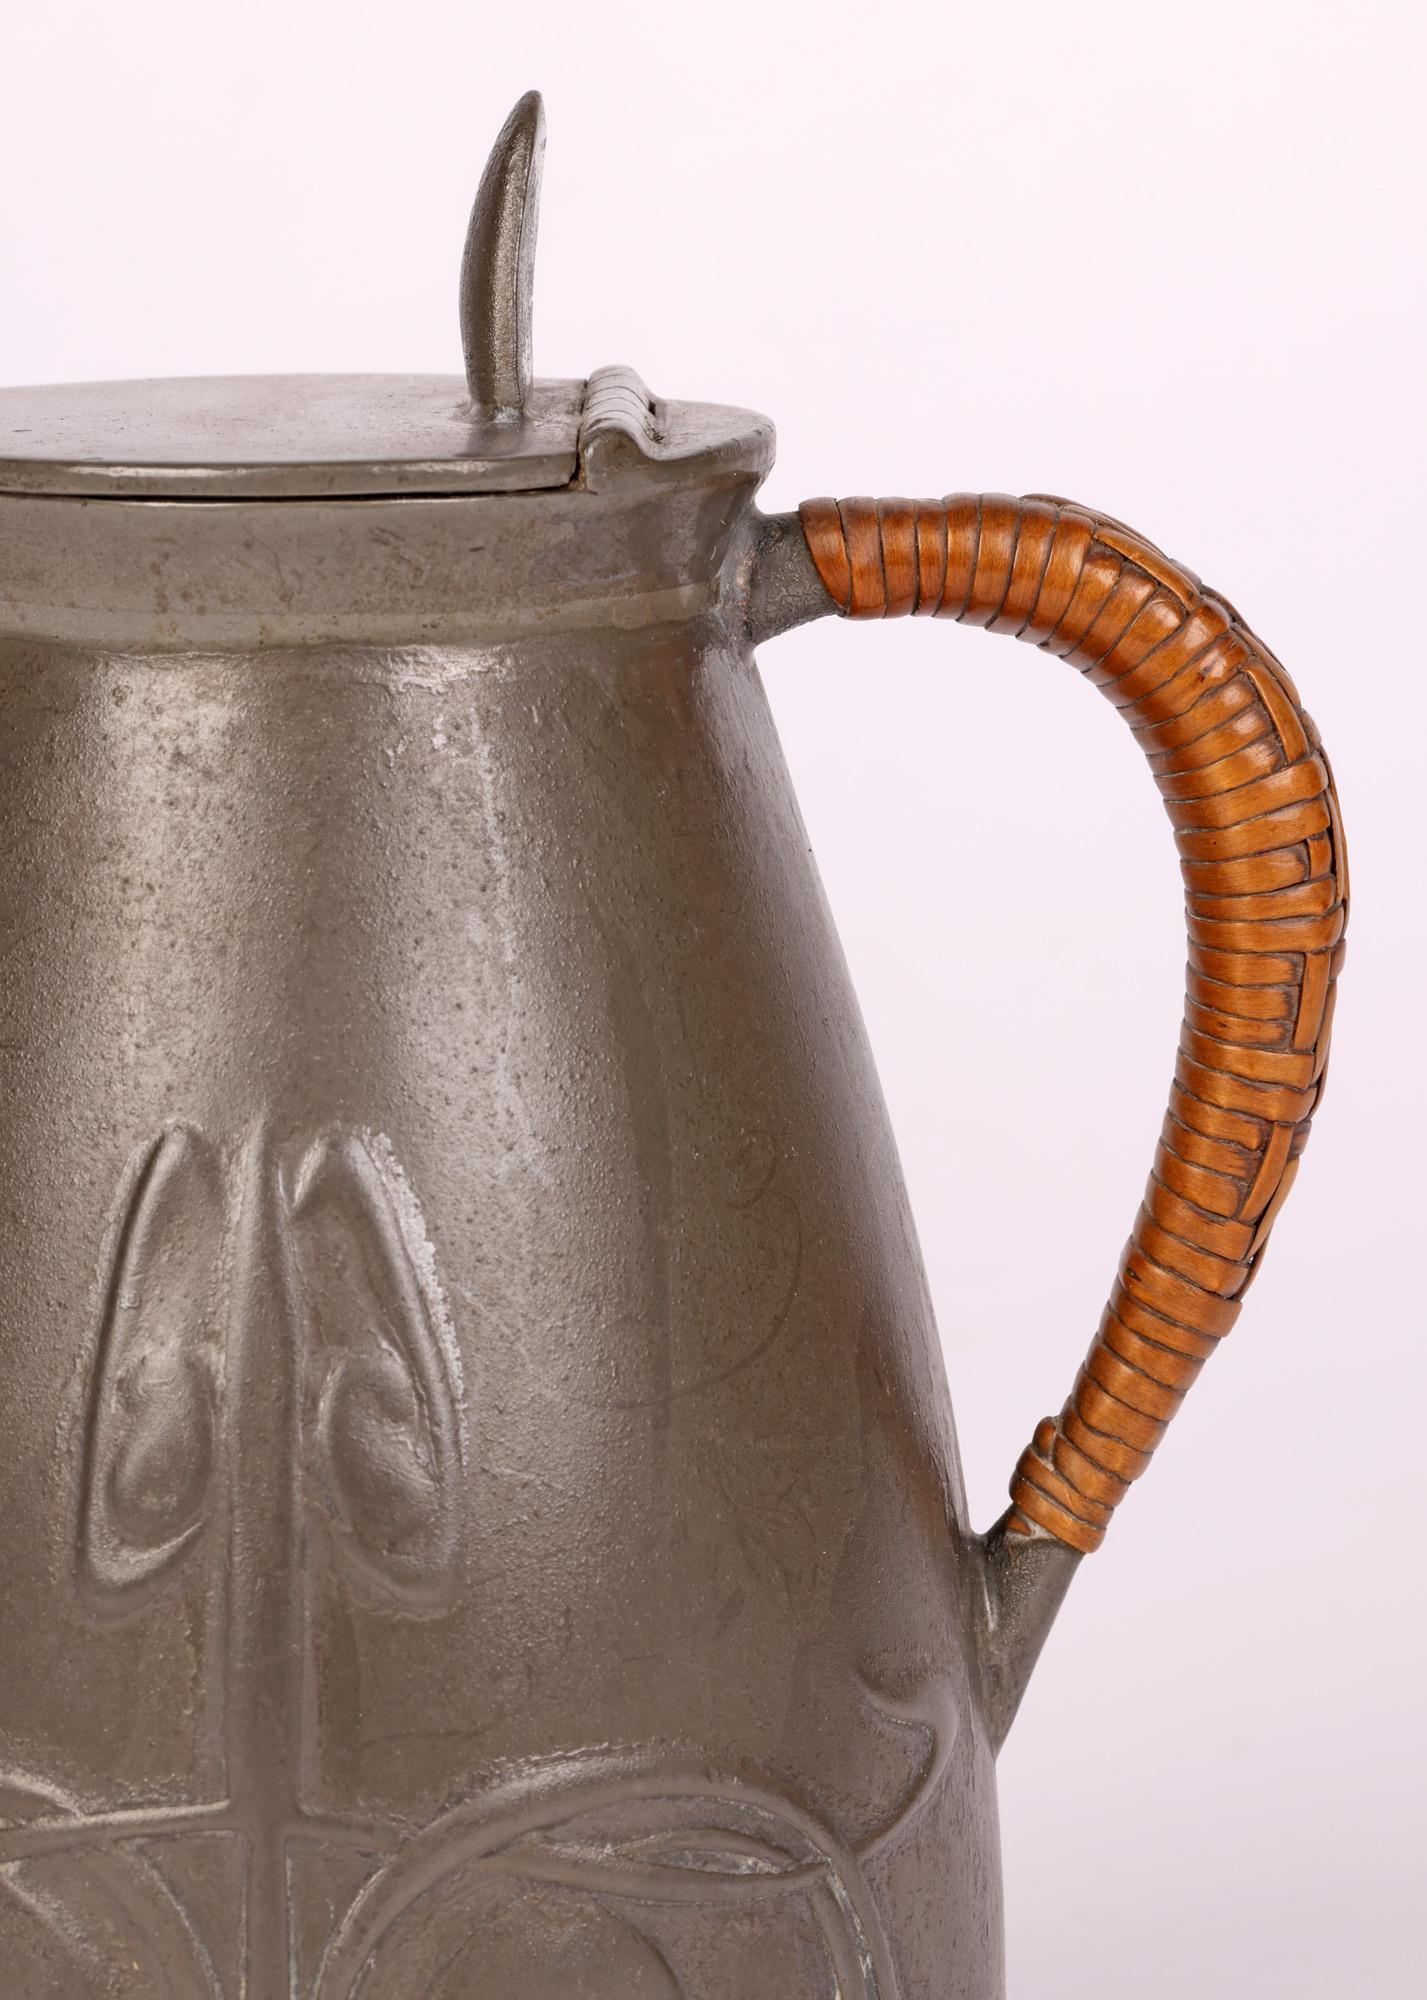 A stylish art nouveau Tudric pewter jug molded with stylized floral designs by renowned designer Archibald Knox (British, 1864-1933) and dating from around 1905. 

Many of these pieces were made and retailed through Liberty & Co, London with Knox